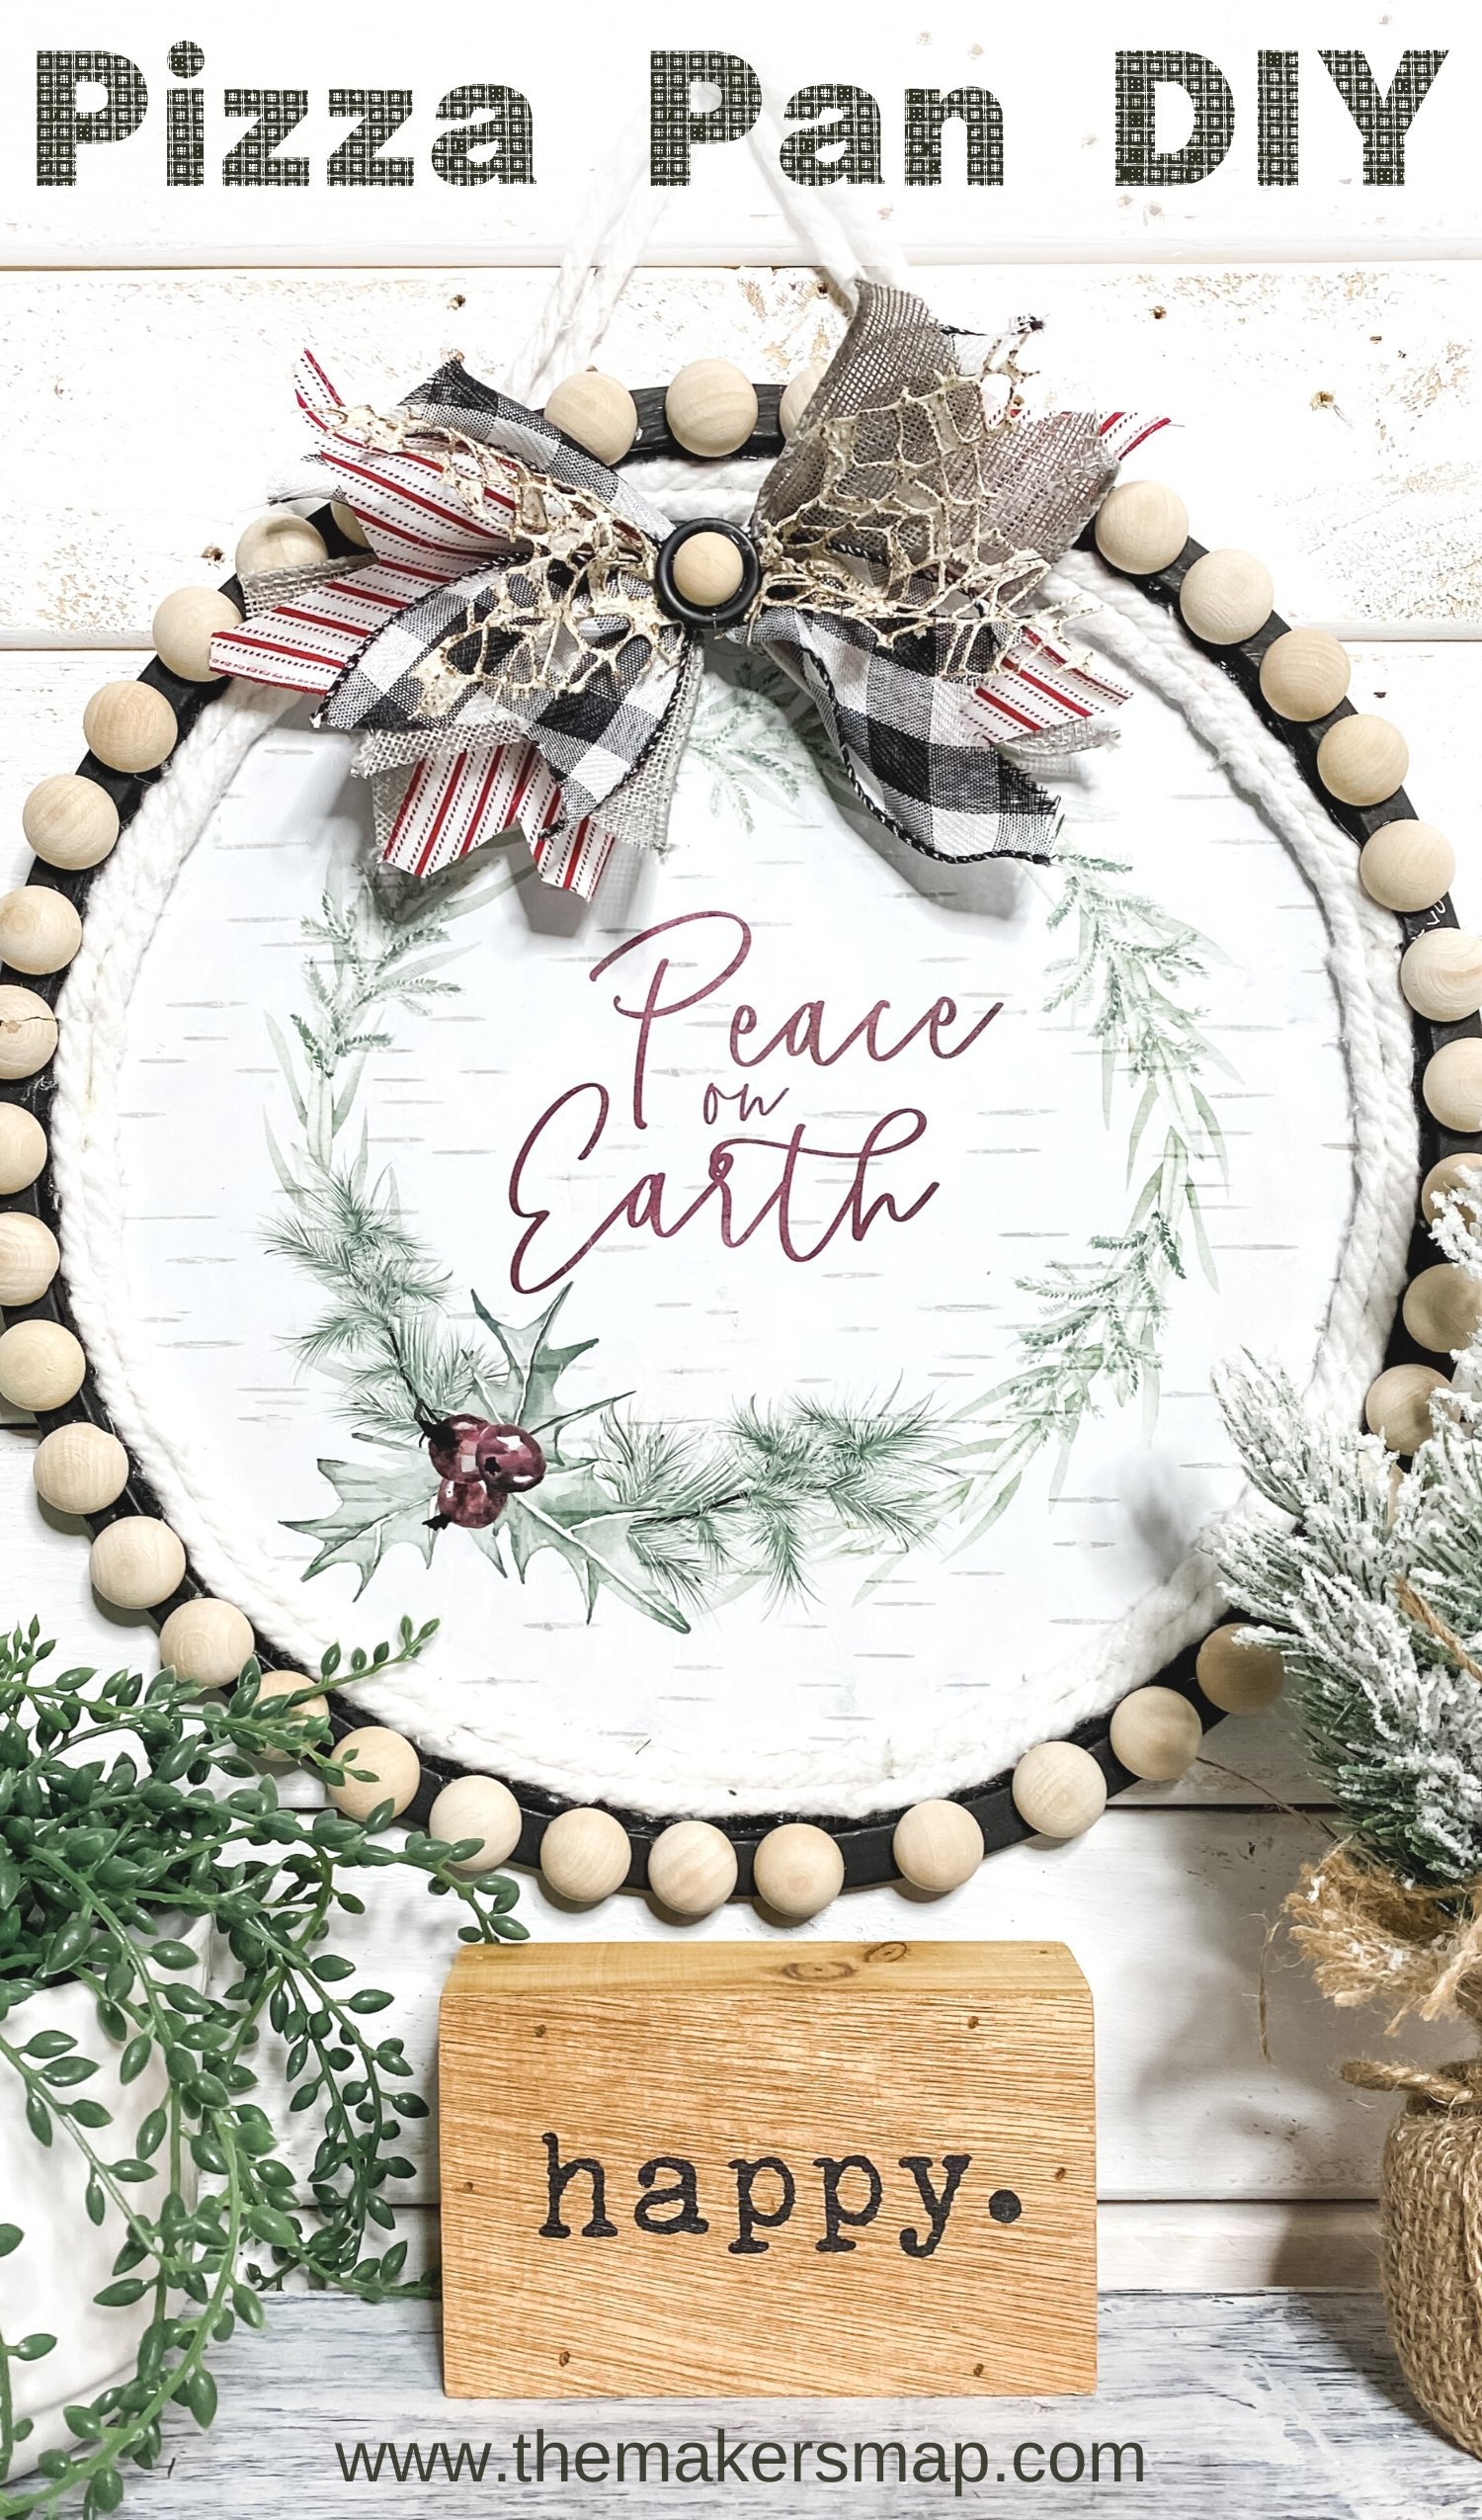 12 Ideas for using DOLLAR TREE PIZZA PANS, Fall DIY's, Christmas Sign